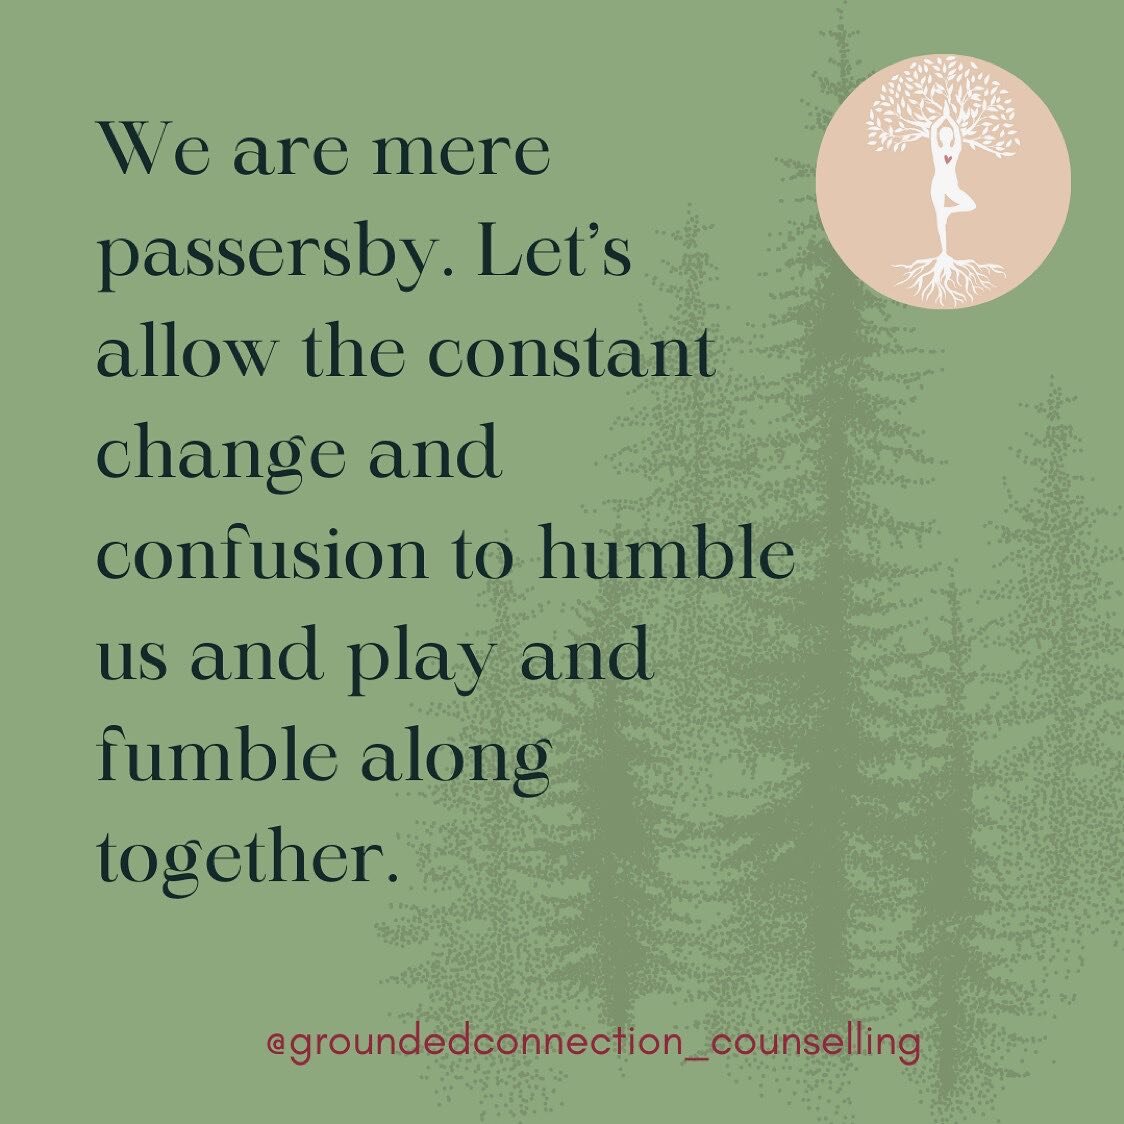 &lsquo;We are mere passersby. Let&rsquo;s allow the constant change and confusion to humble us and play and fumble along together.&rsquo;

There is something that&rsquo;s certain in this life and that is change. We move in constant cycles around the 